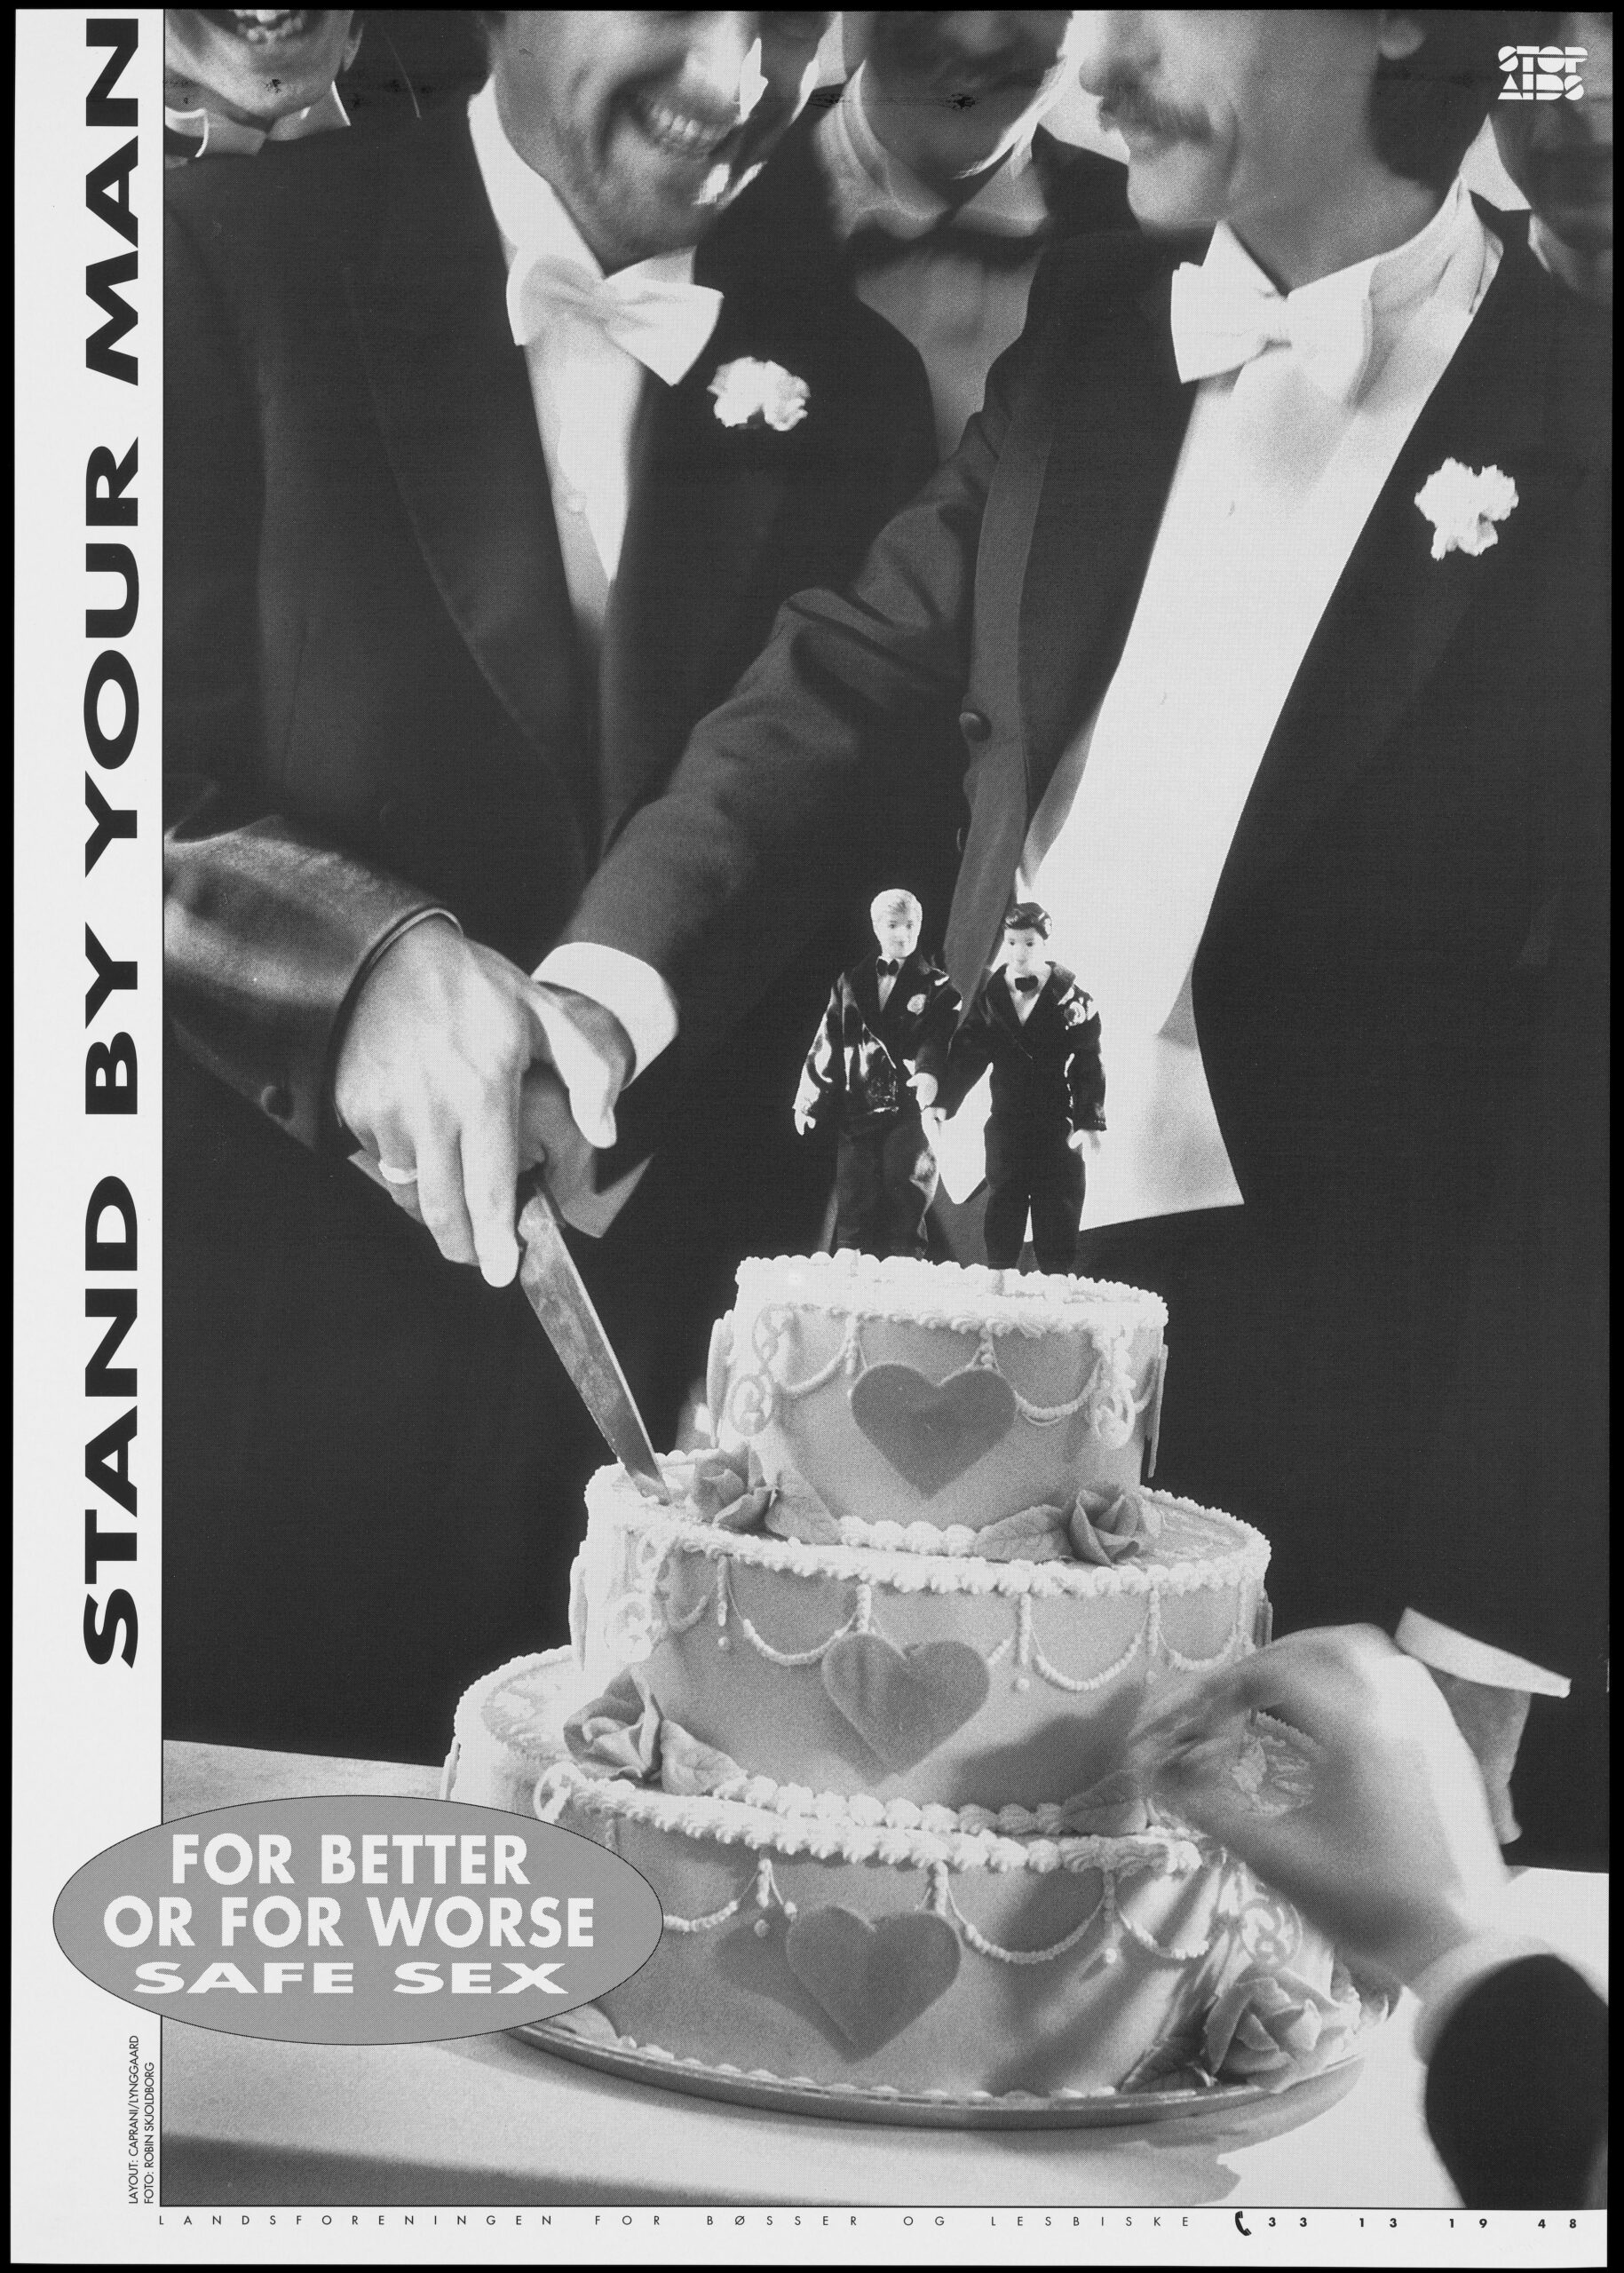 Two smiling men in tuxedos both hold a knife that cuts into the wedding cake in front of them